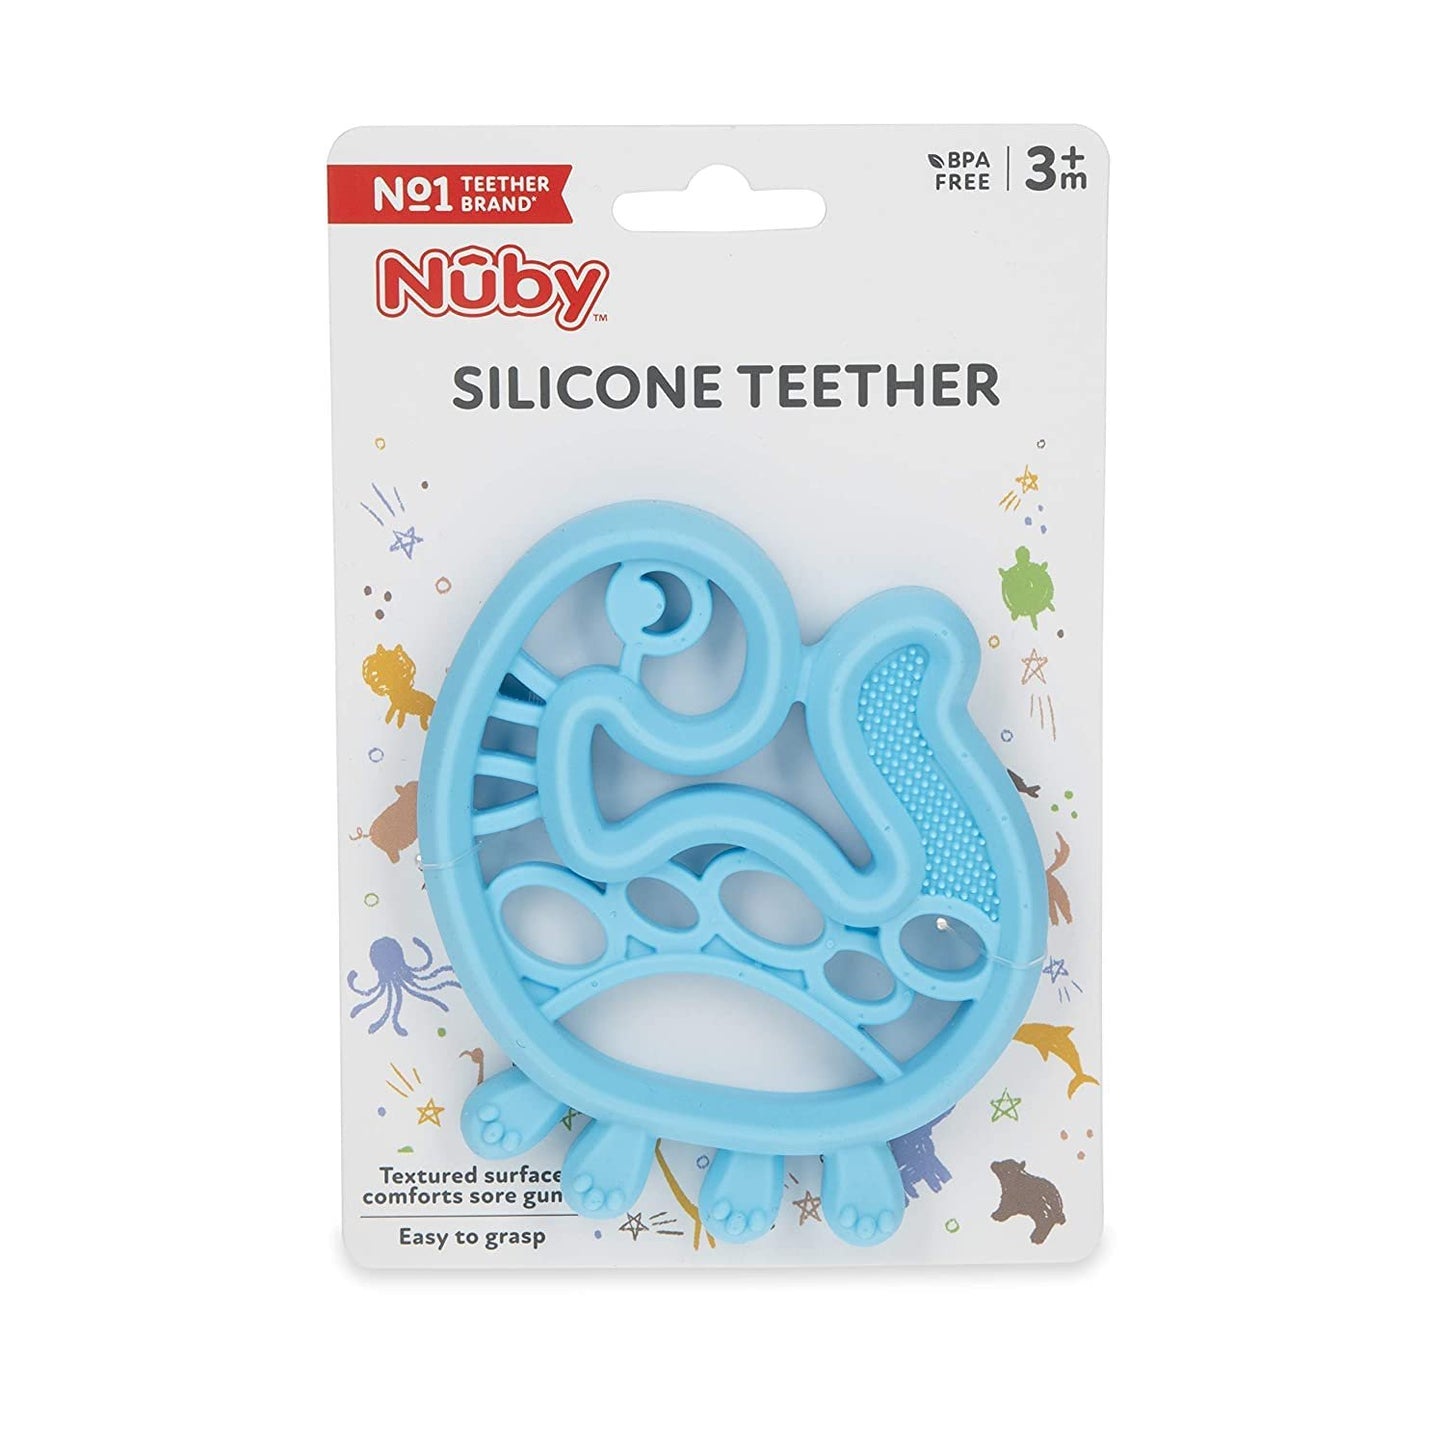 Nuby 100% Soft Silicone Teether with Massaging Bristles